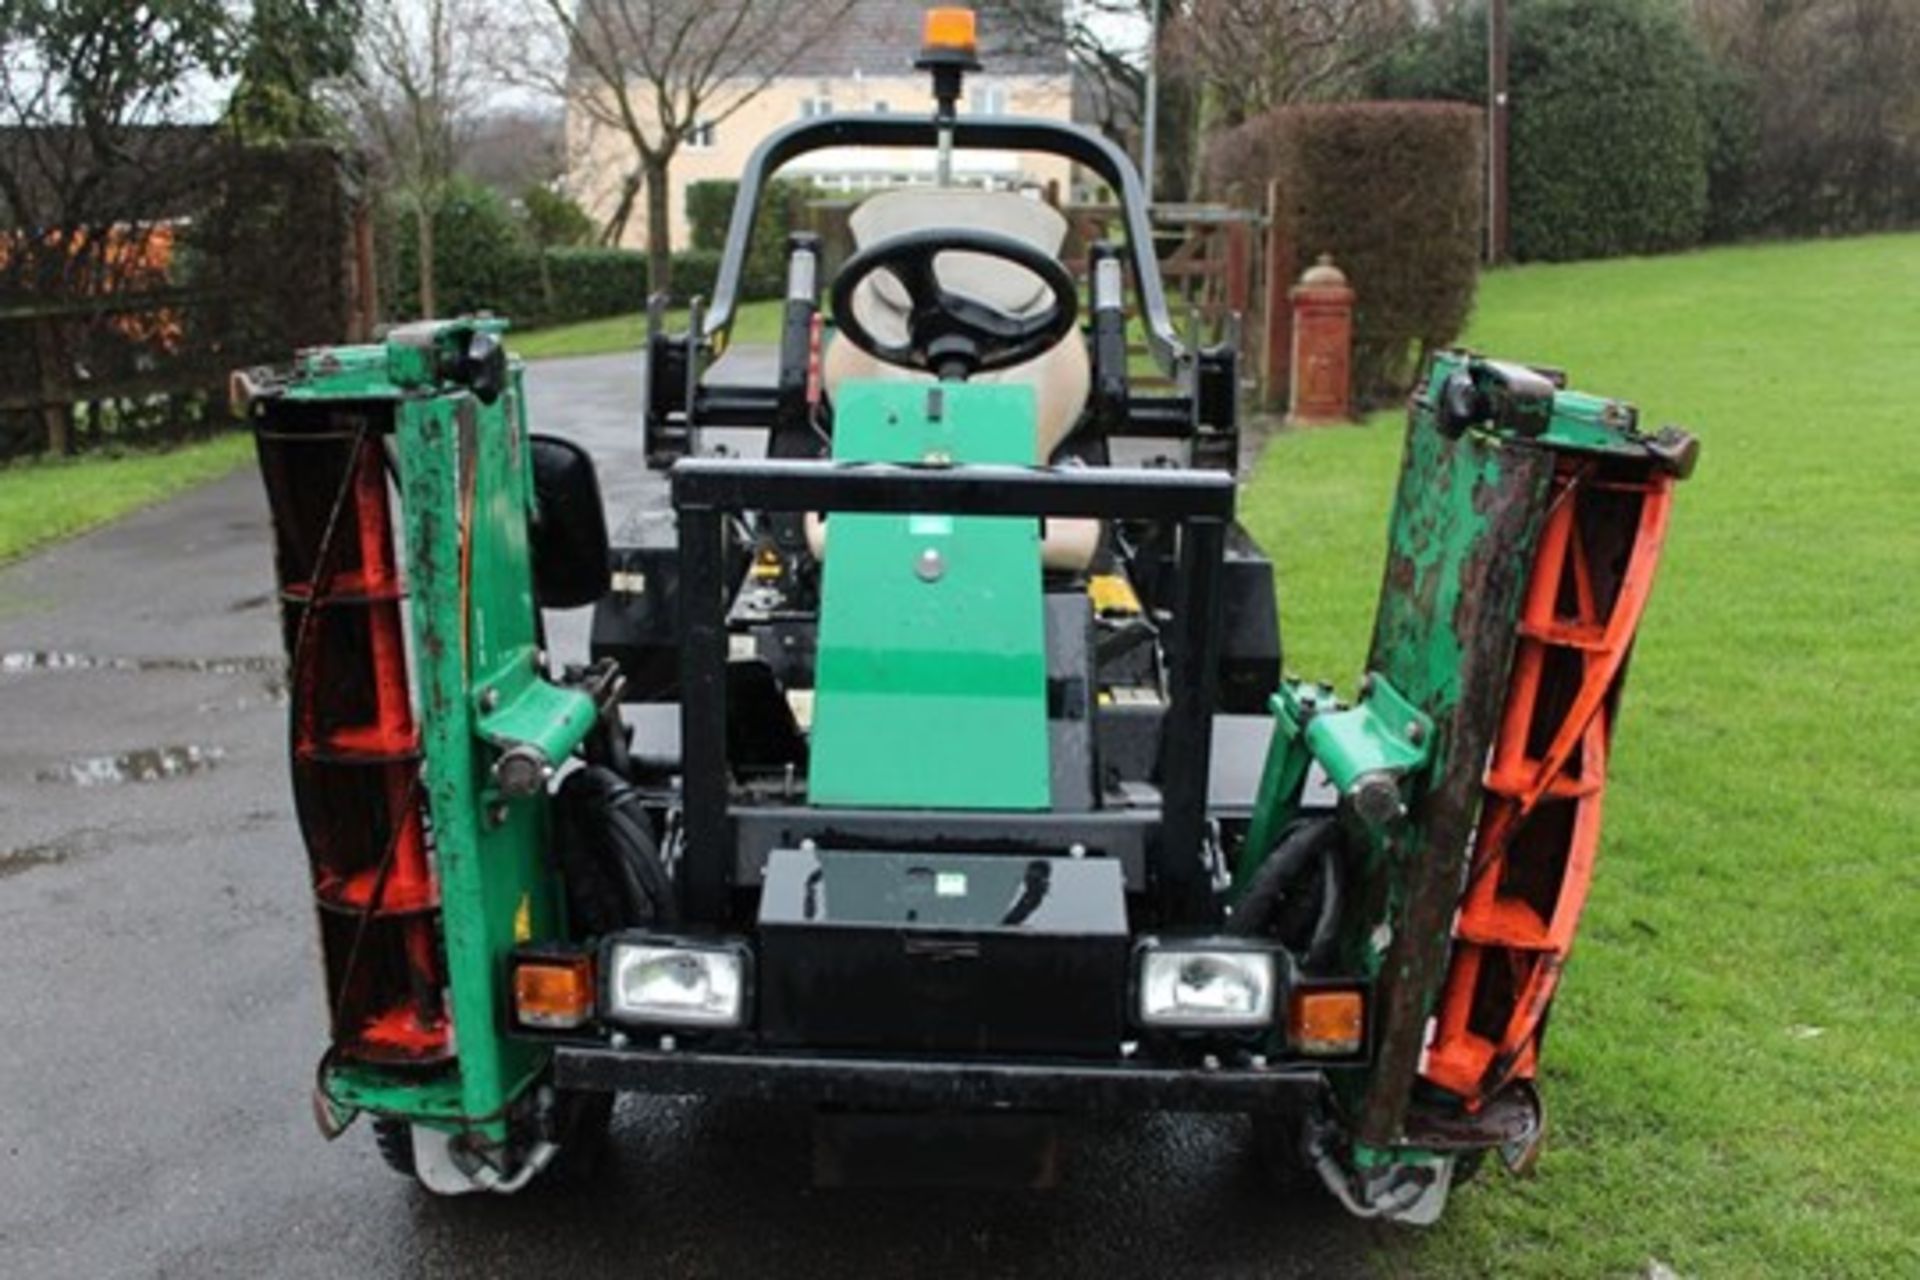 2010 Ransomes Parkway 2250 Plus Ride On Cylinder Mower - Image 8 of 8